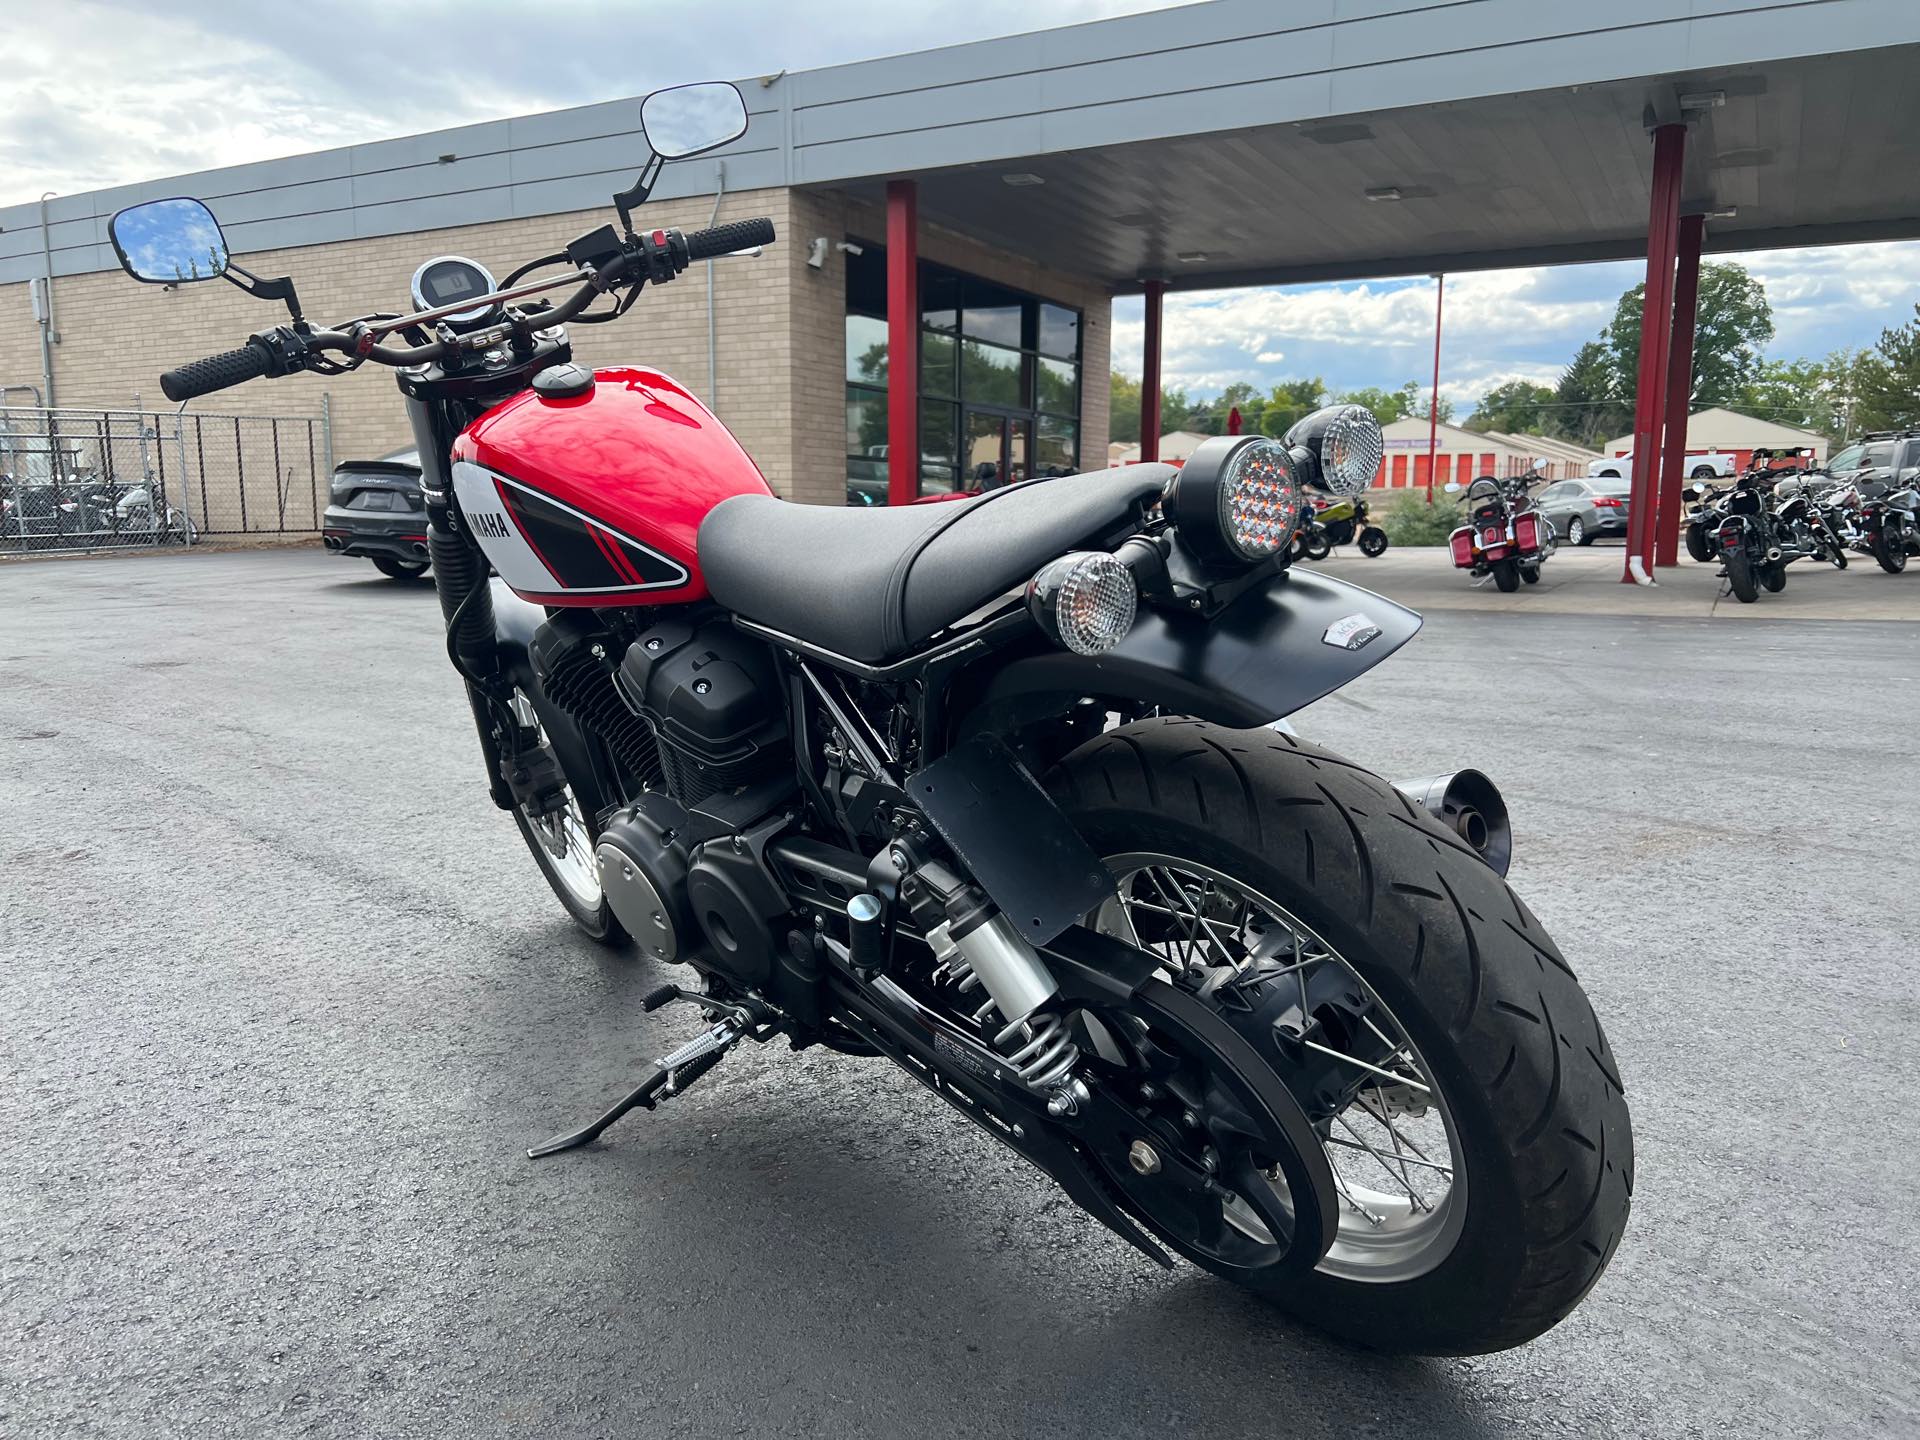 2017 Yamaha SCR 950 at Aces Motorcycles - Fort Collins